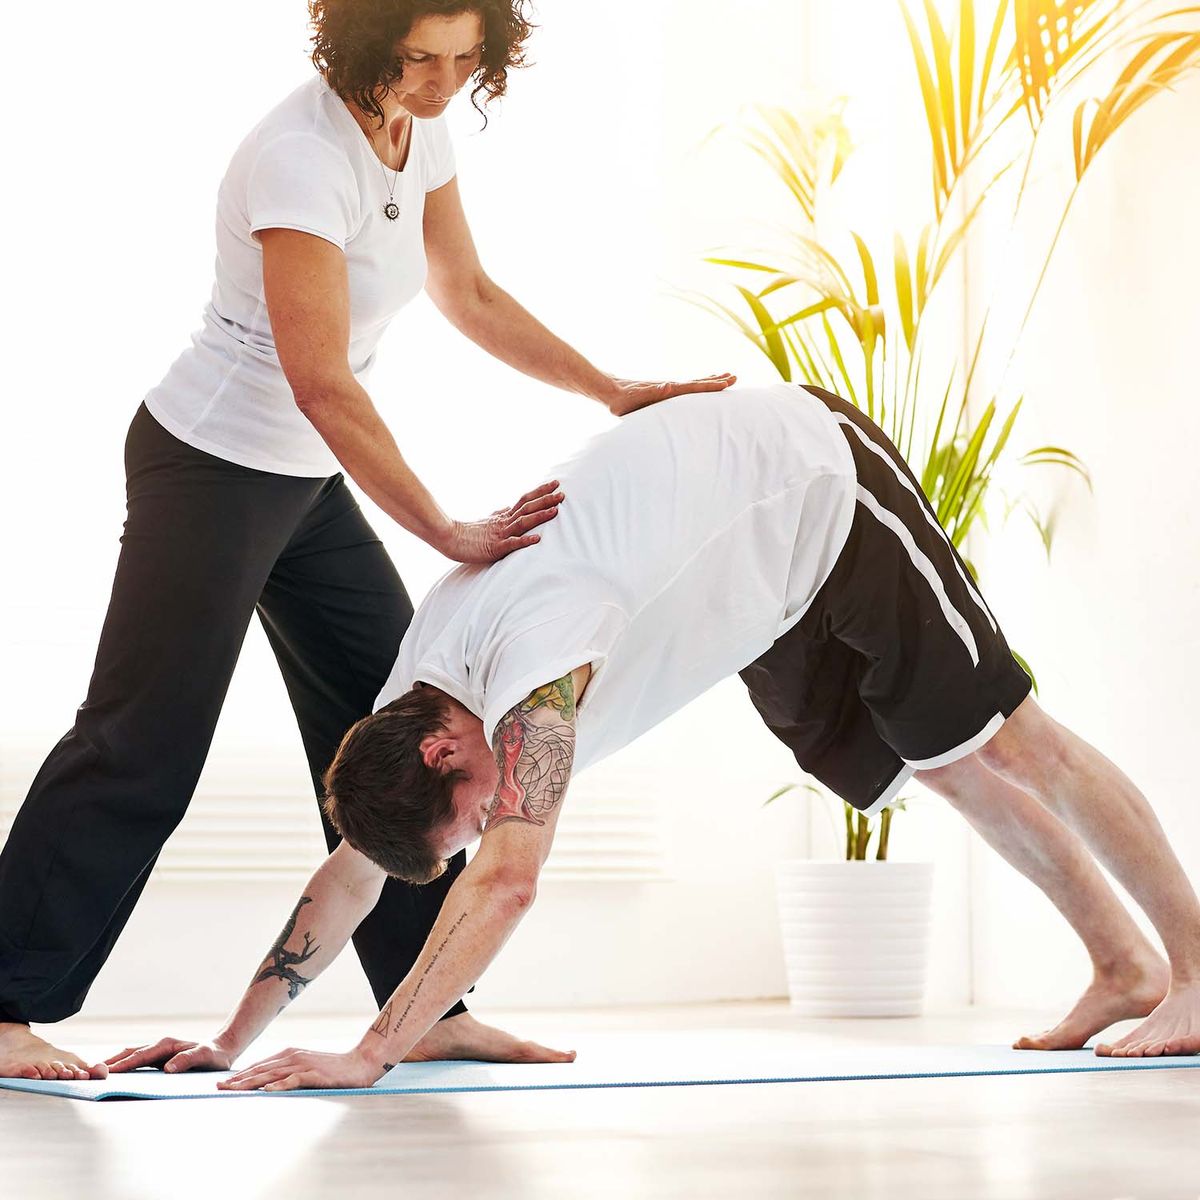 Man in downward dog yoga pose with instructor present